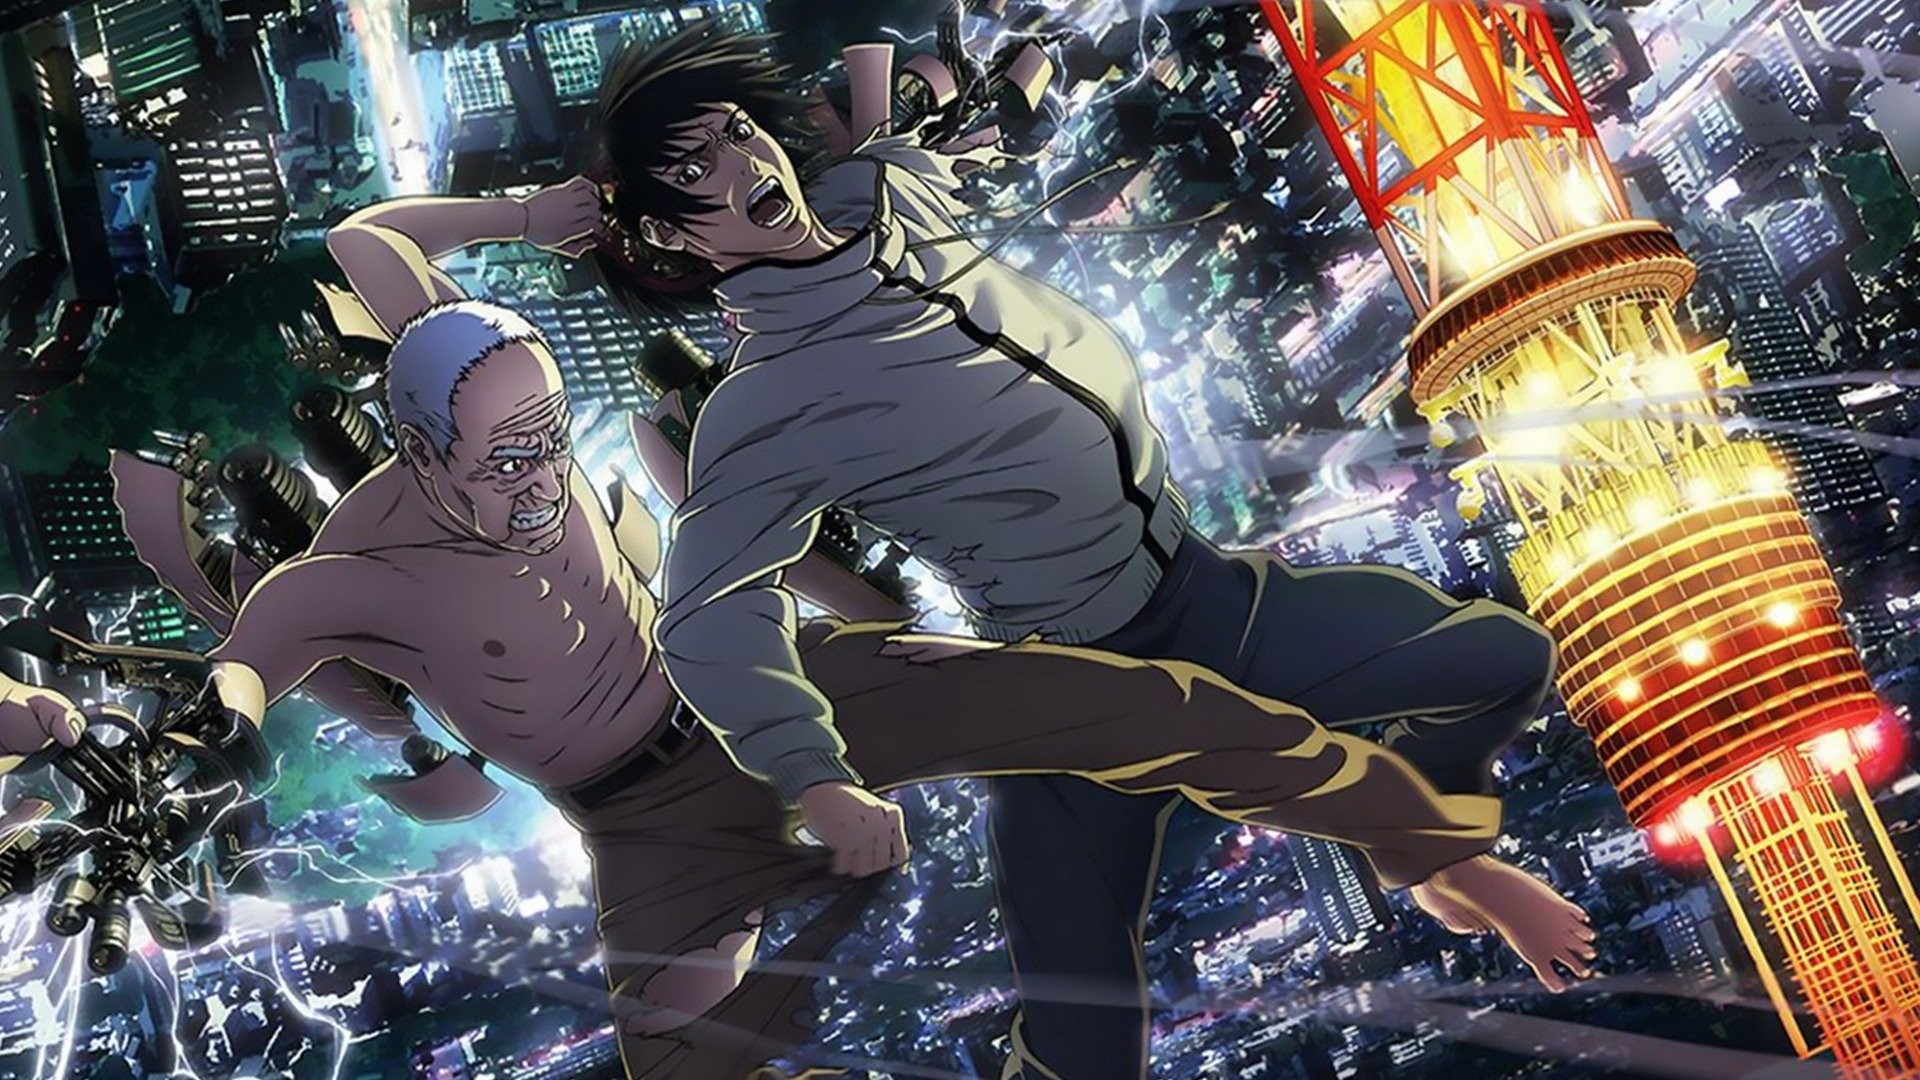 Inuyashiki: Last Hero: Where to Watch and Stream Online